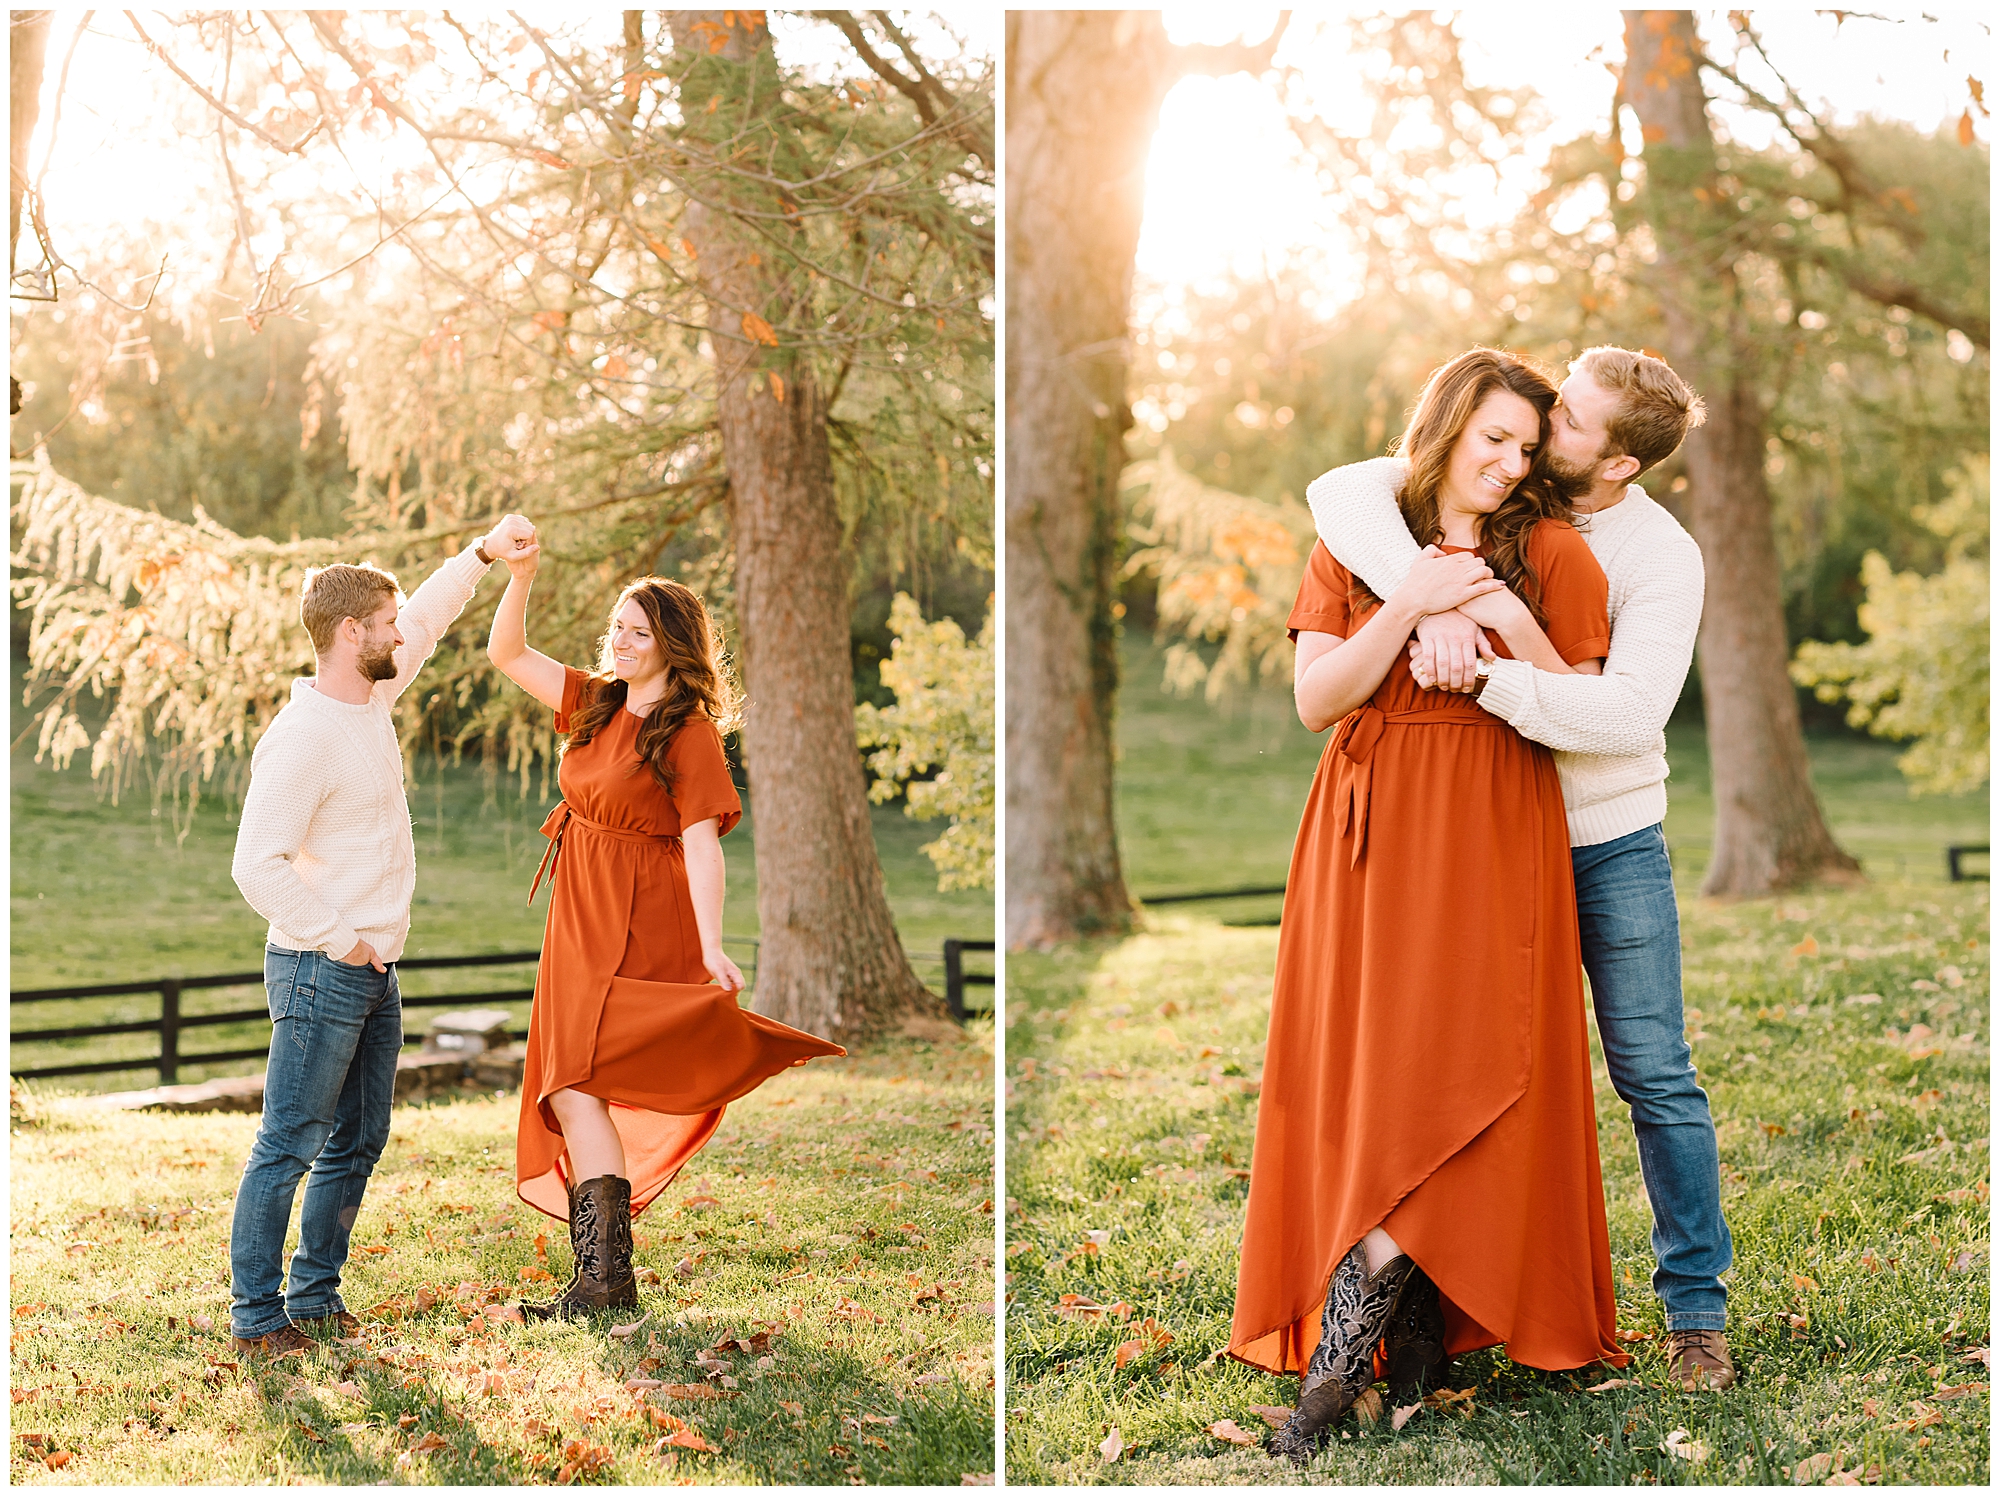 KrystaNormanPhoto_Intimate_Fall_Couples_Session_Purcellville_Virginia_Photographer_Krysta_Norman_0014.jpg